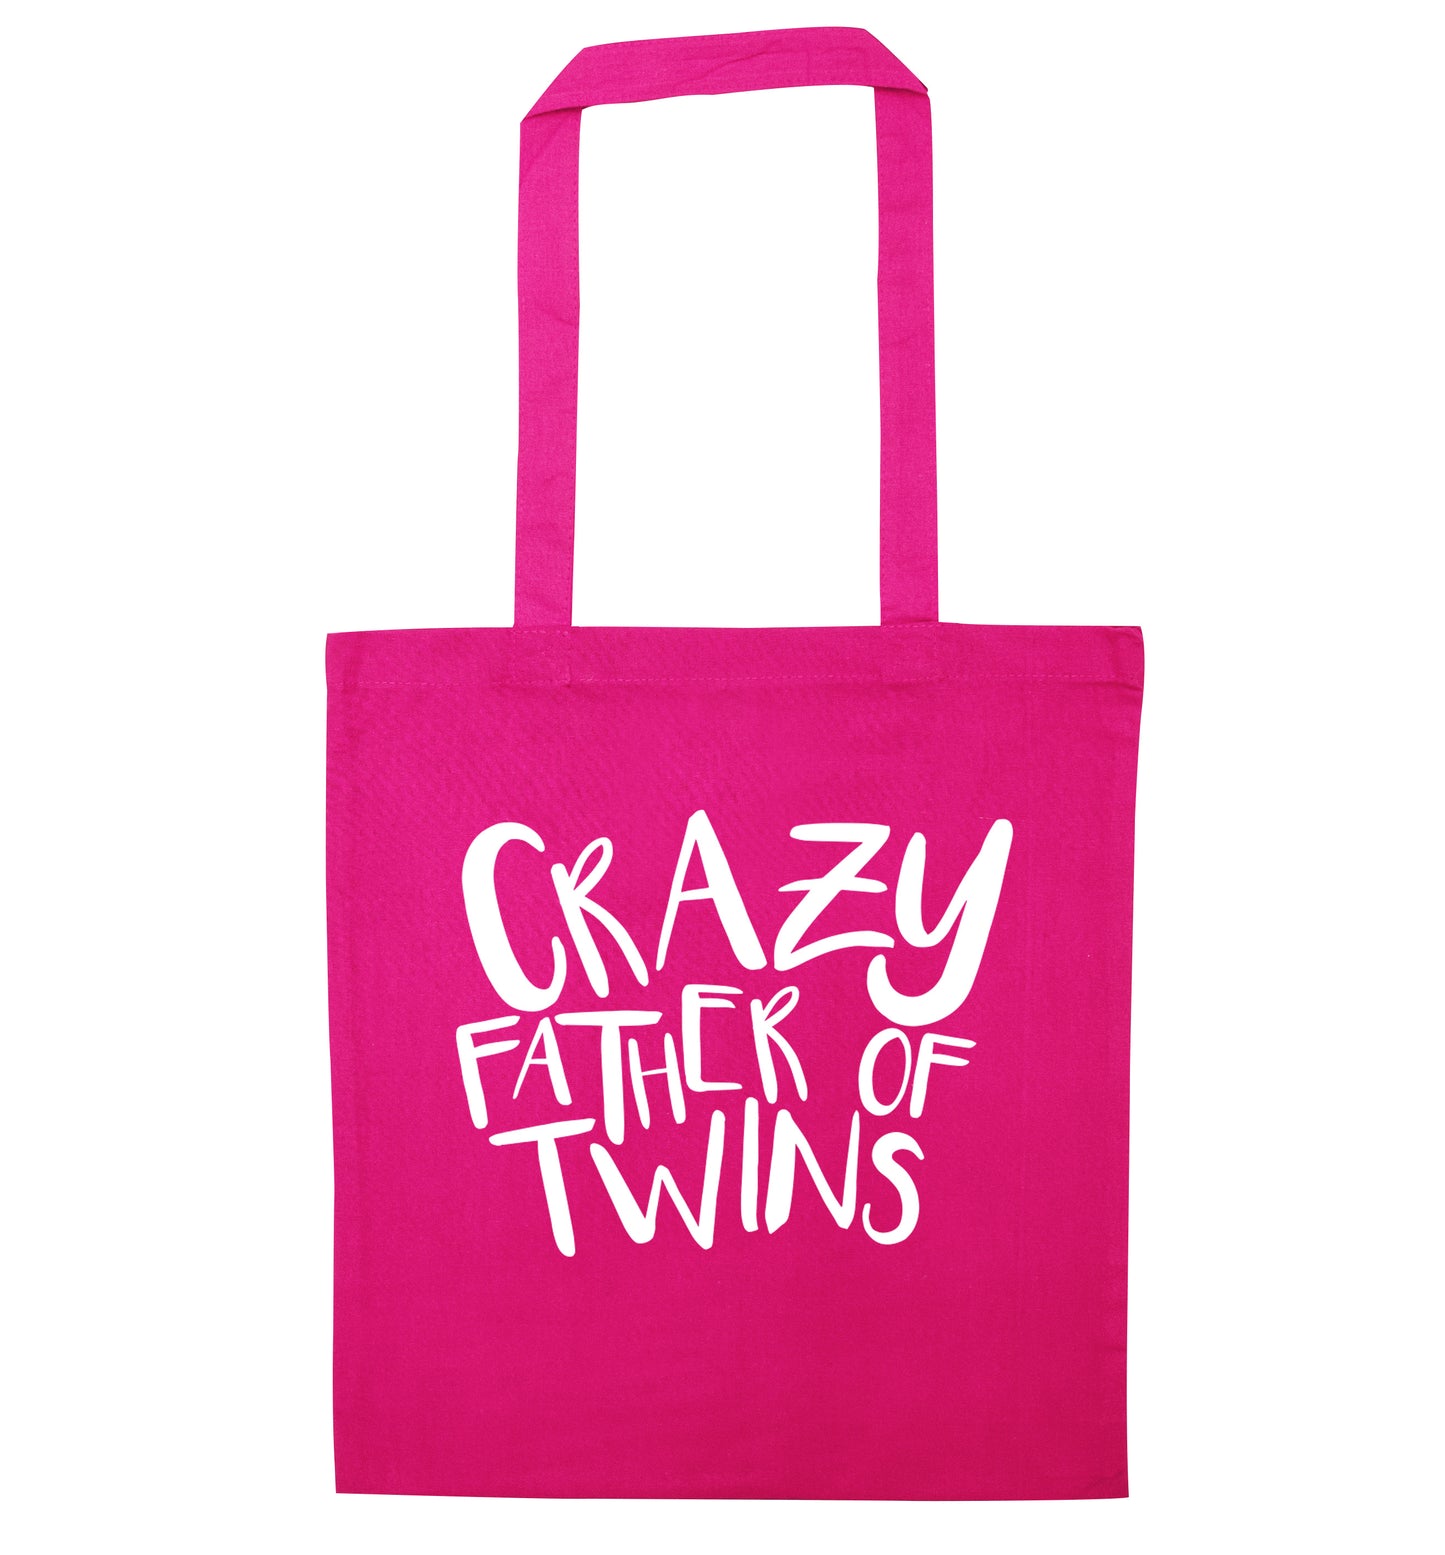 Crazy father of twins pink tote bag